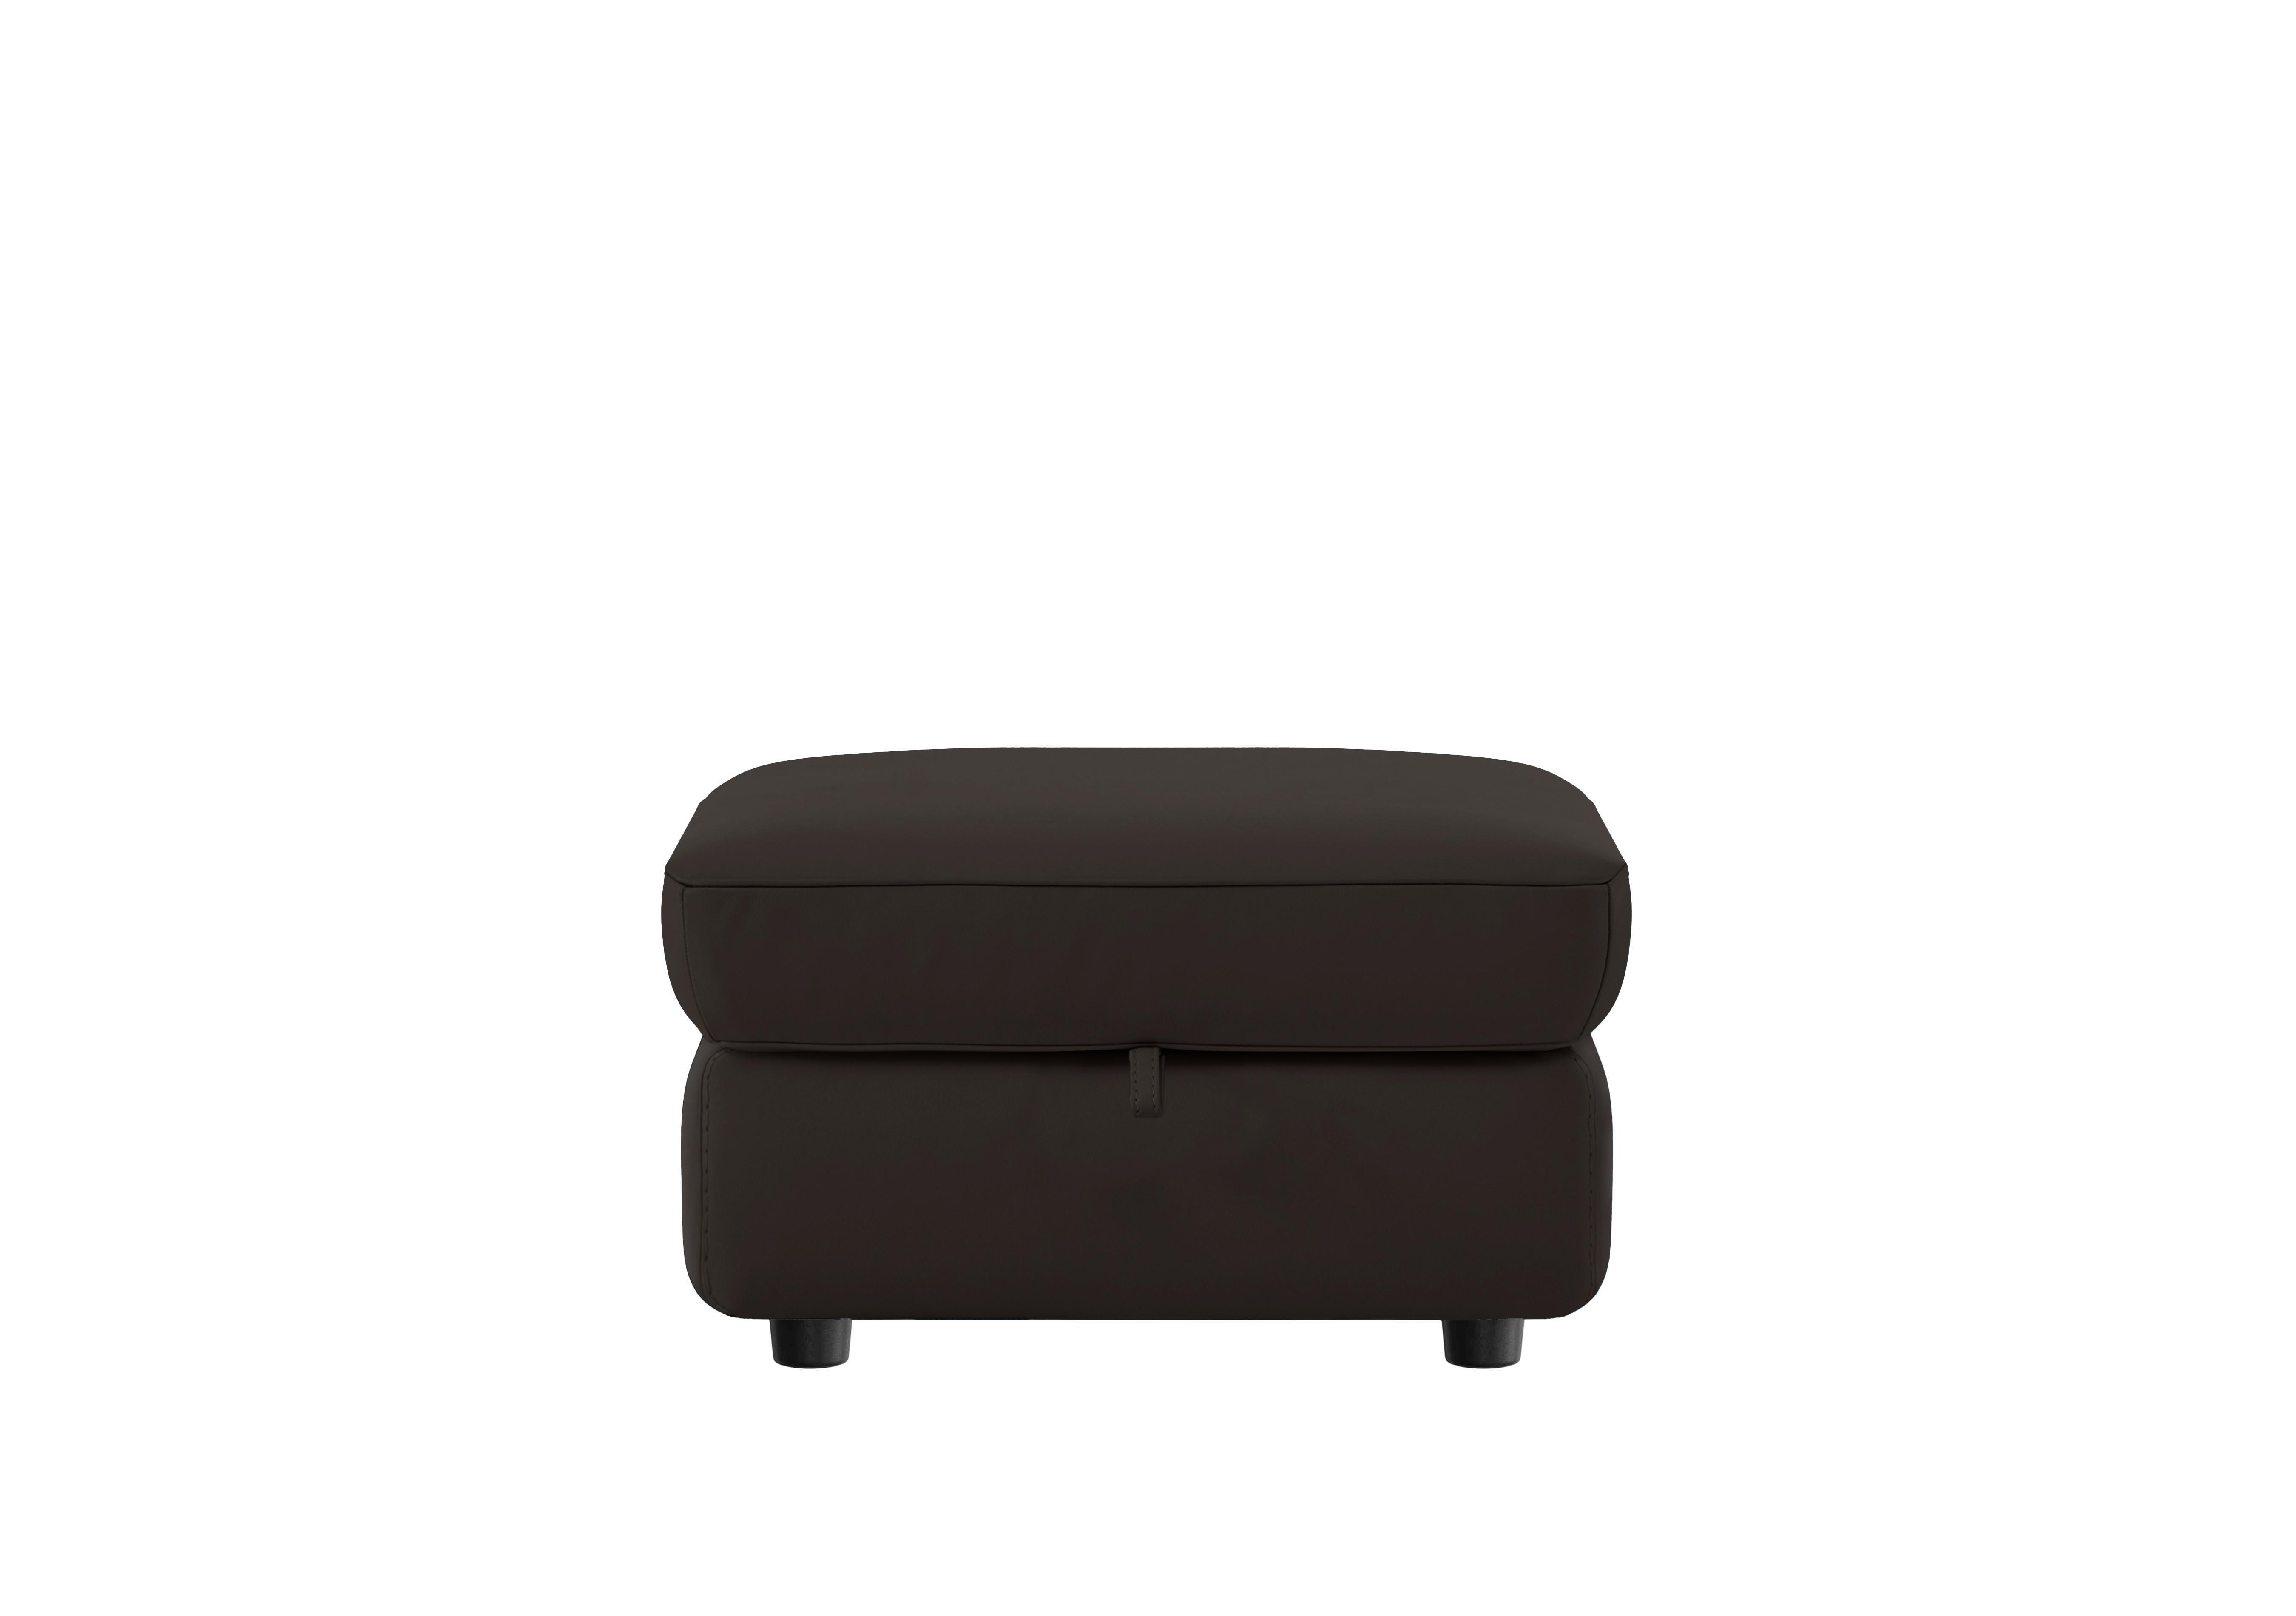 Compact Collection Piccolo Leather Storage Footstool in Bv-1748 Dark Chocolate on Furniture Village